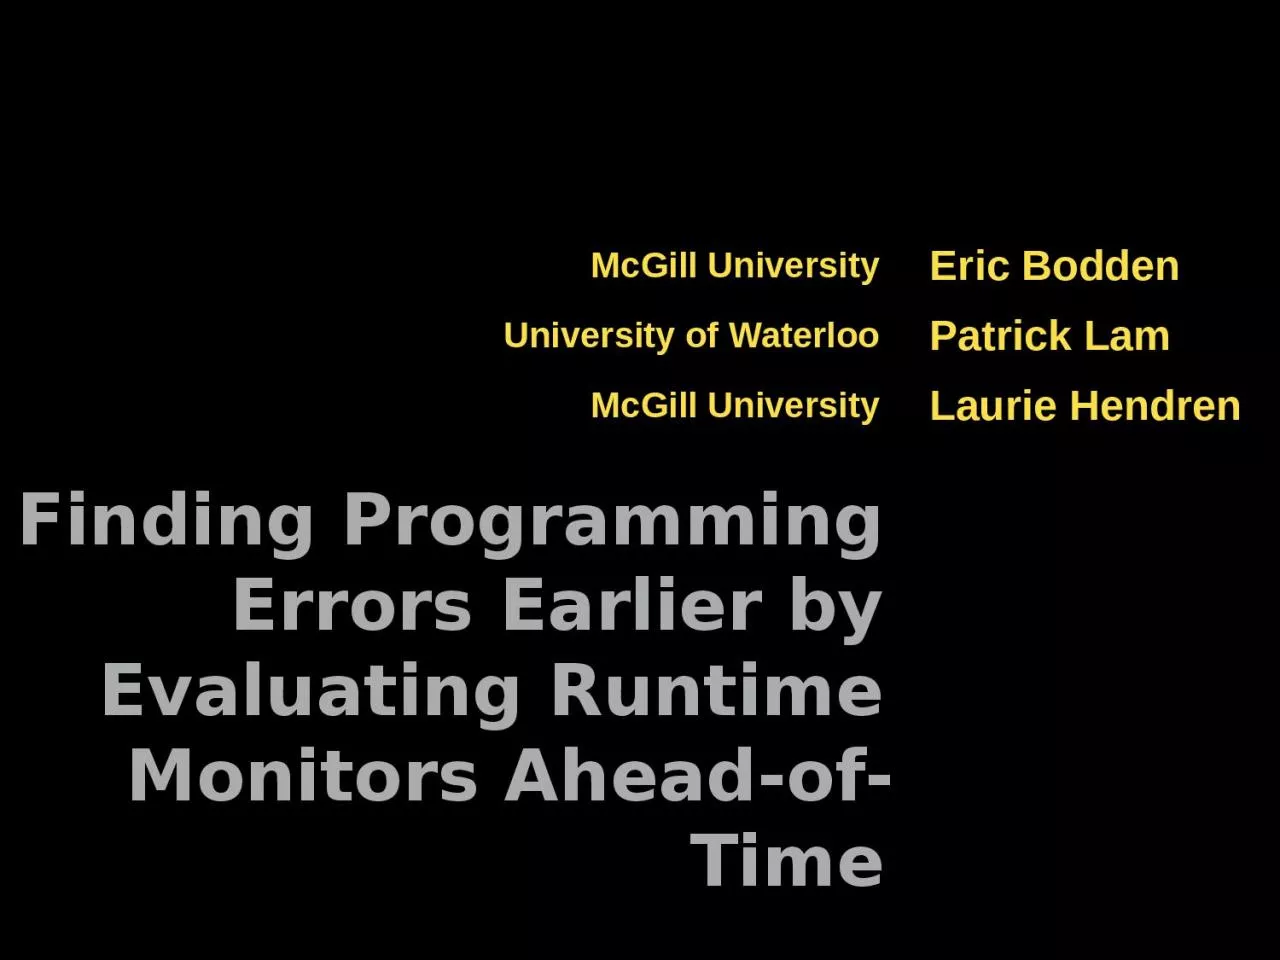 Finding Programming Errors Earlier by Evaluating Runtime Monitors Ahead-of-Time